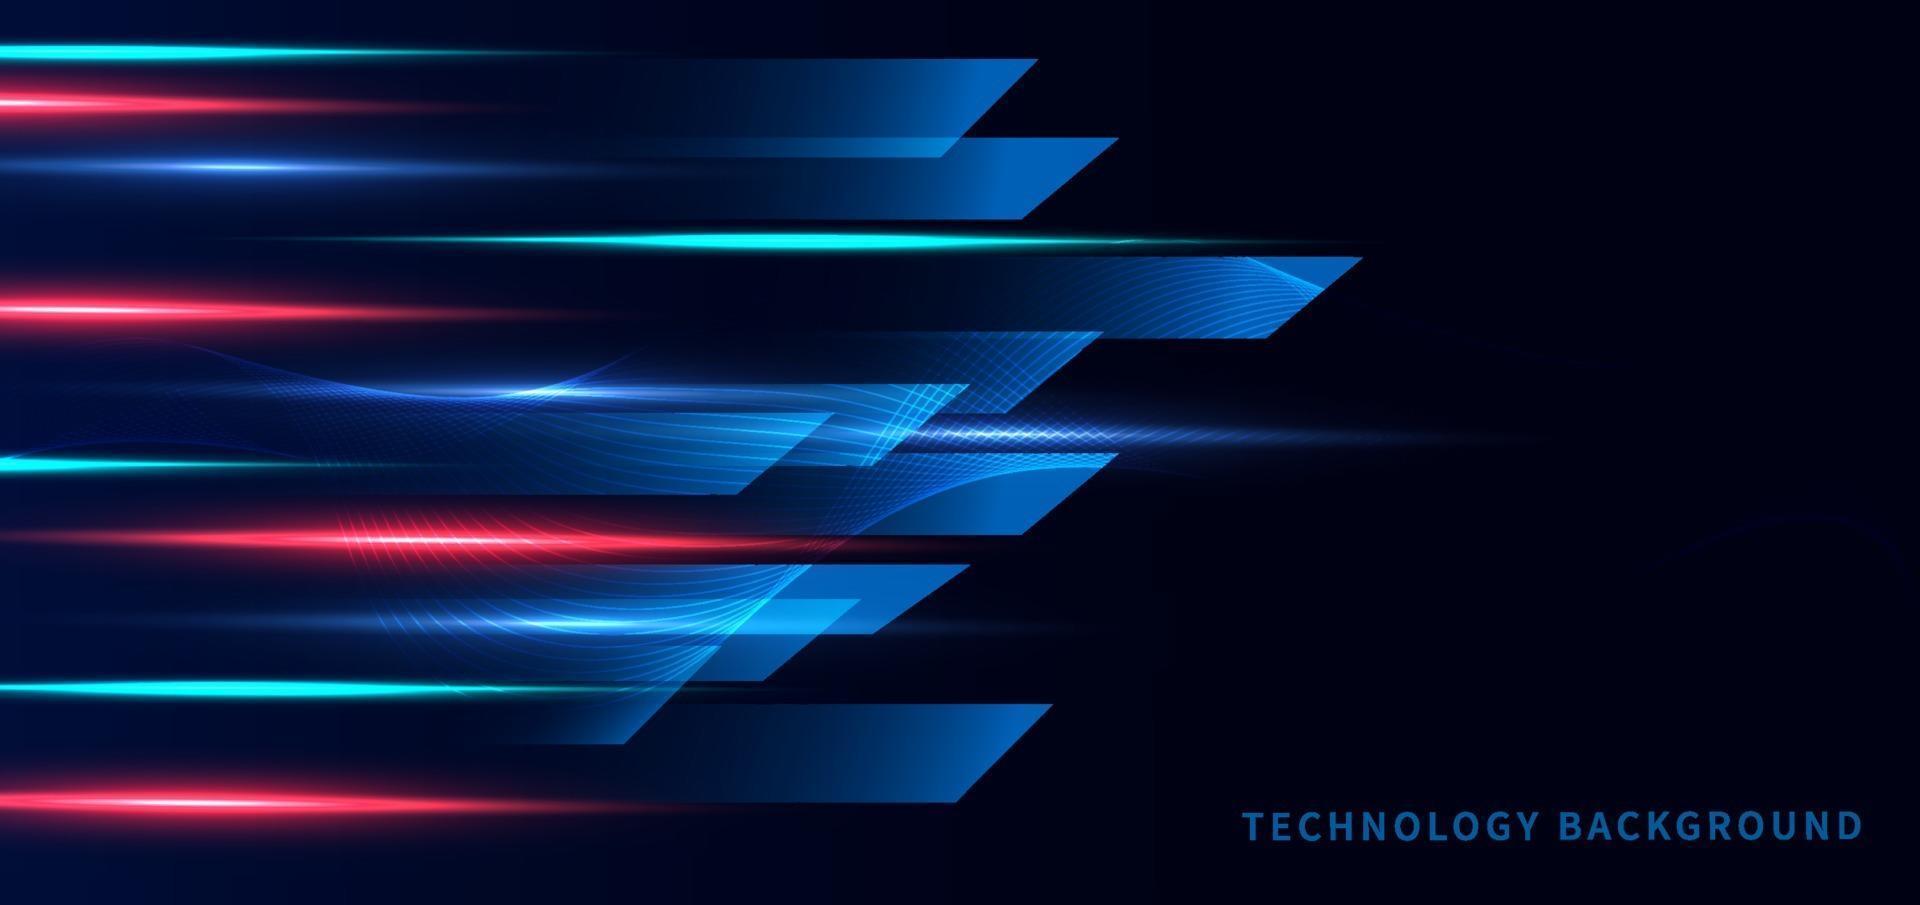 Template banner abstract technology futuristic geometric on dard blue background with red, blue light effect. vector